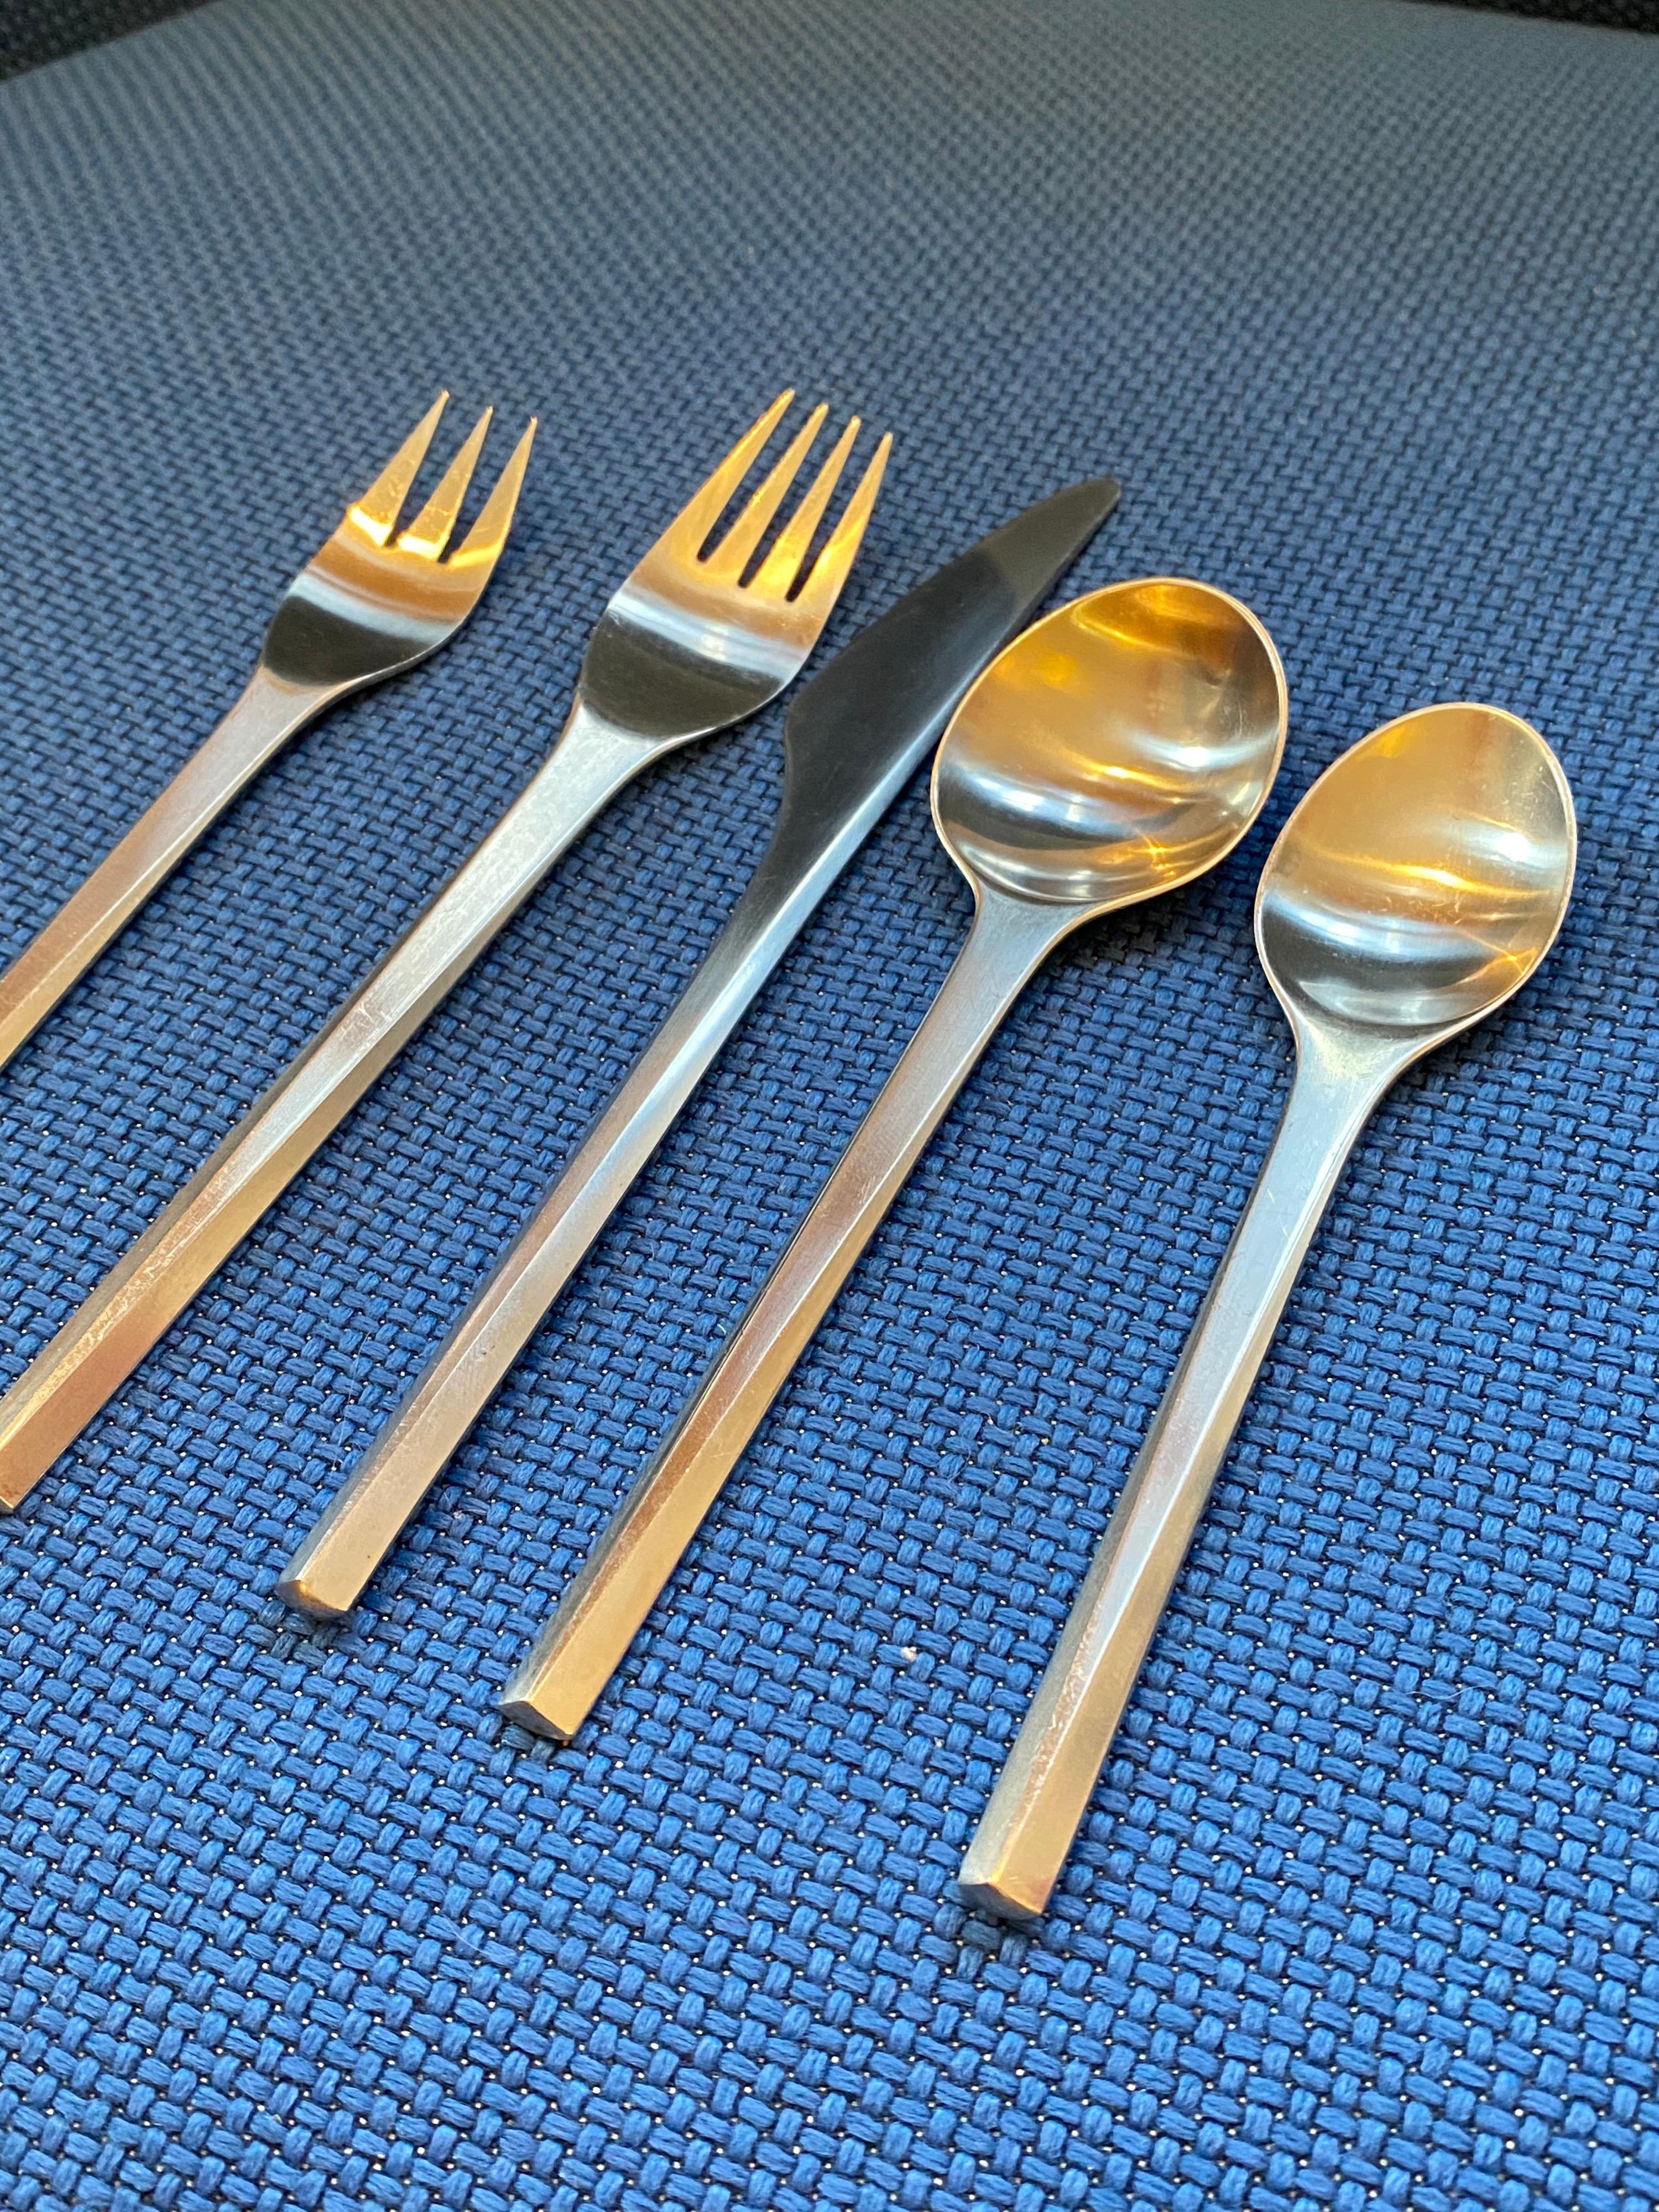 Georg Jensen satin stainless set in the prism pattern, circa 1962 design. Set includes 5 pieces per place setting plus an additional 6 pieces, serving spoons, forks and butter spreaders. Great elegant design with a triangular shape to handles.